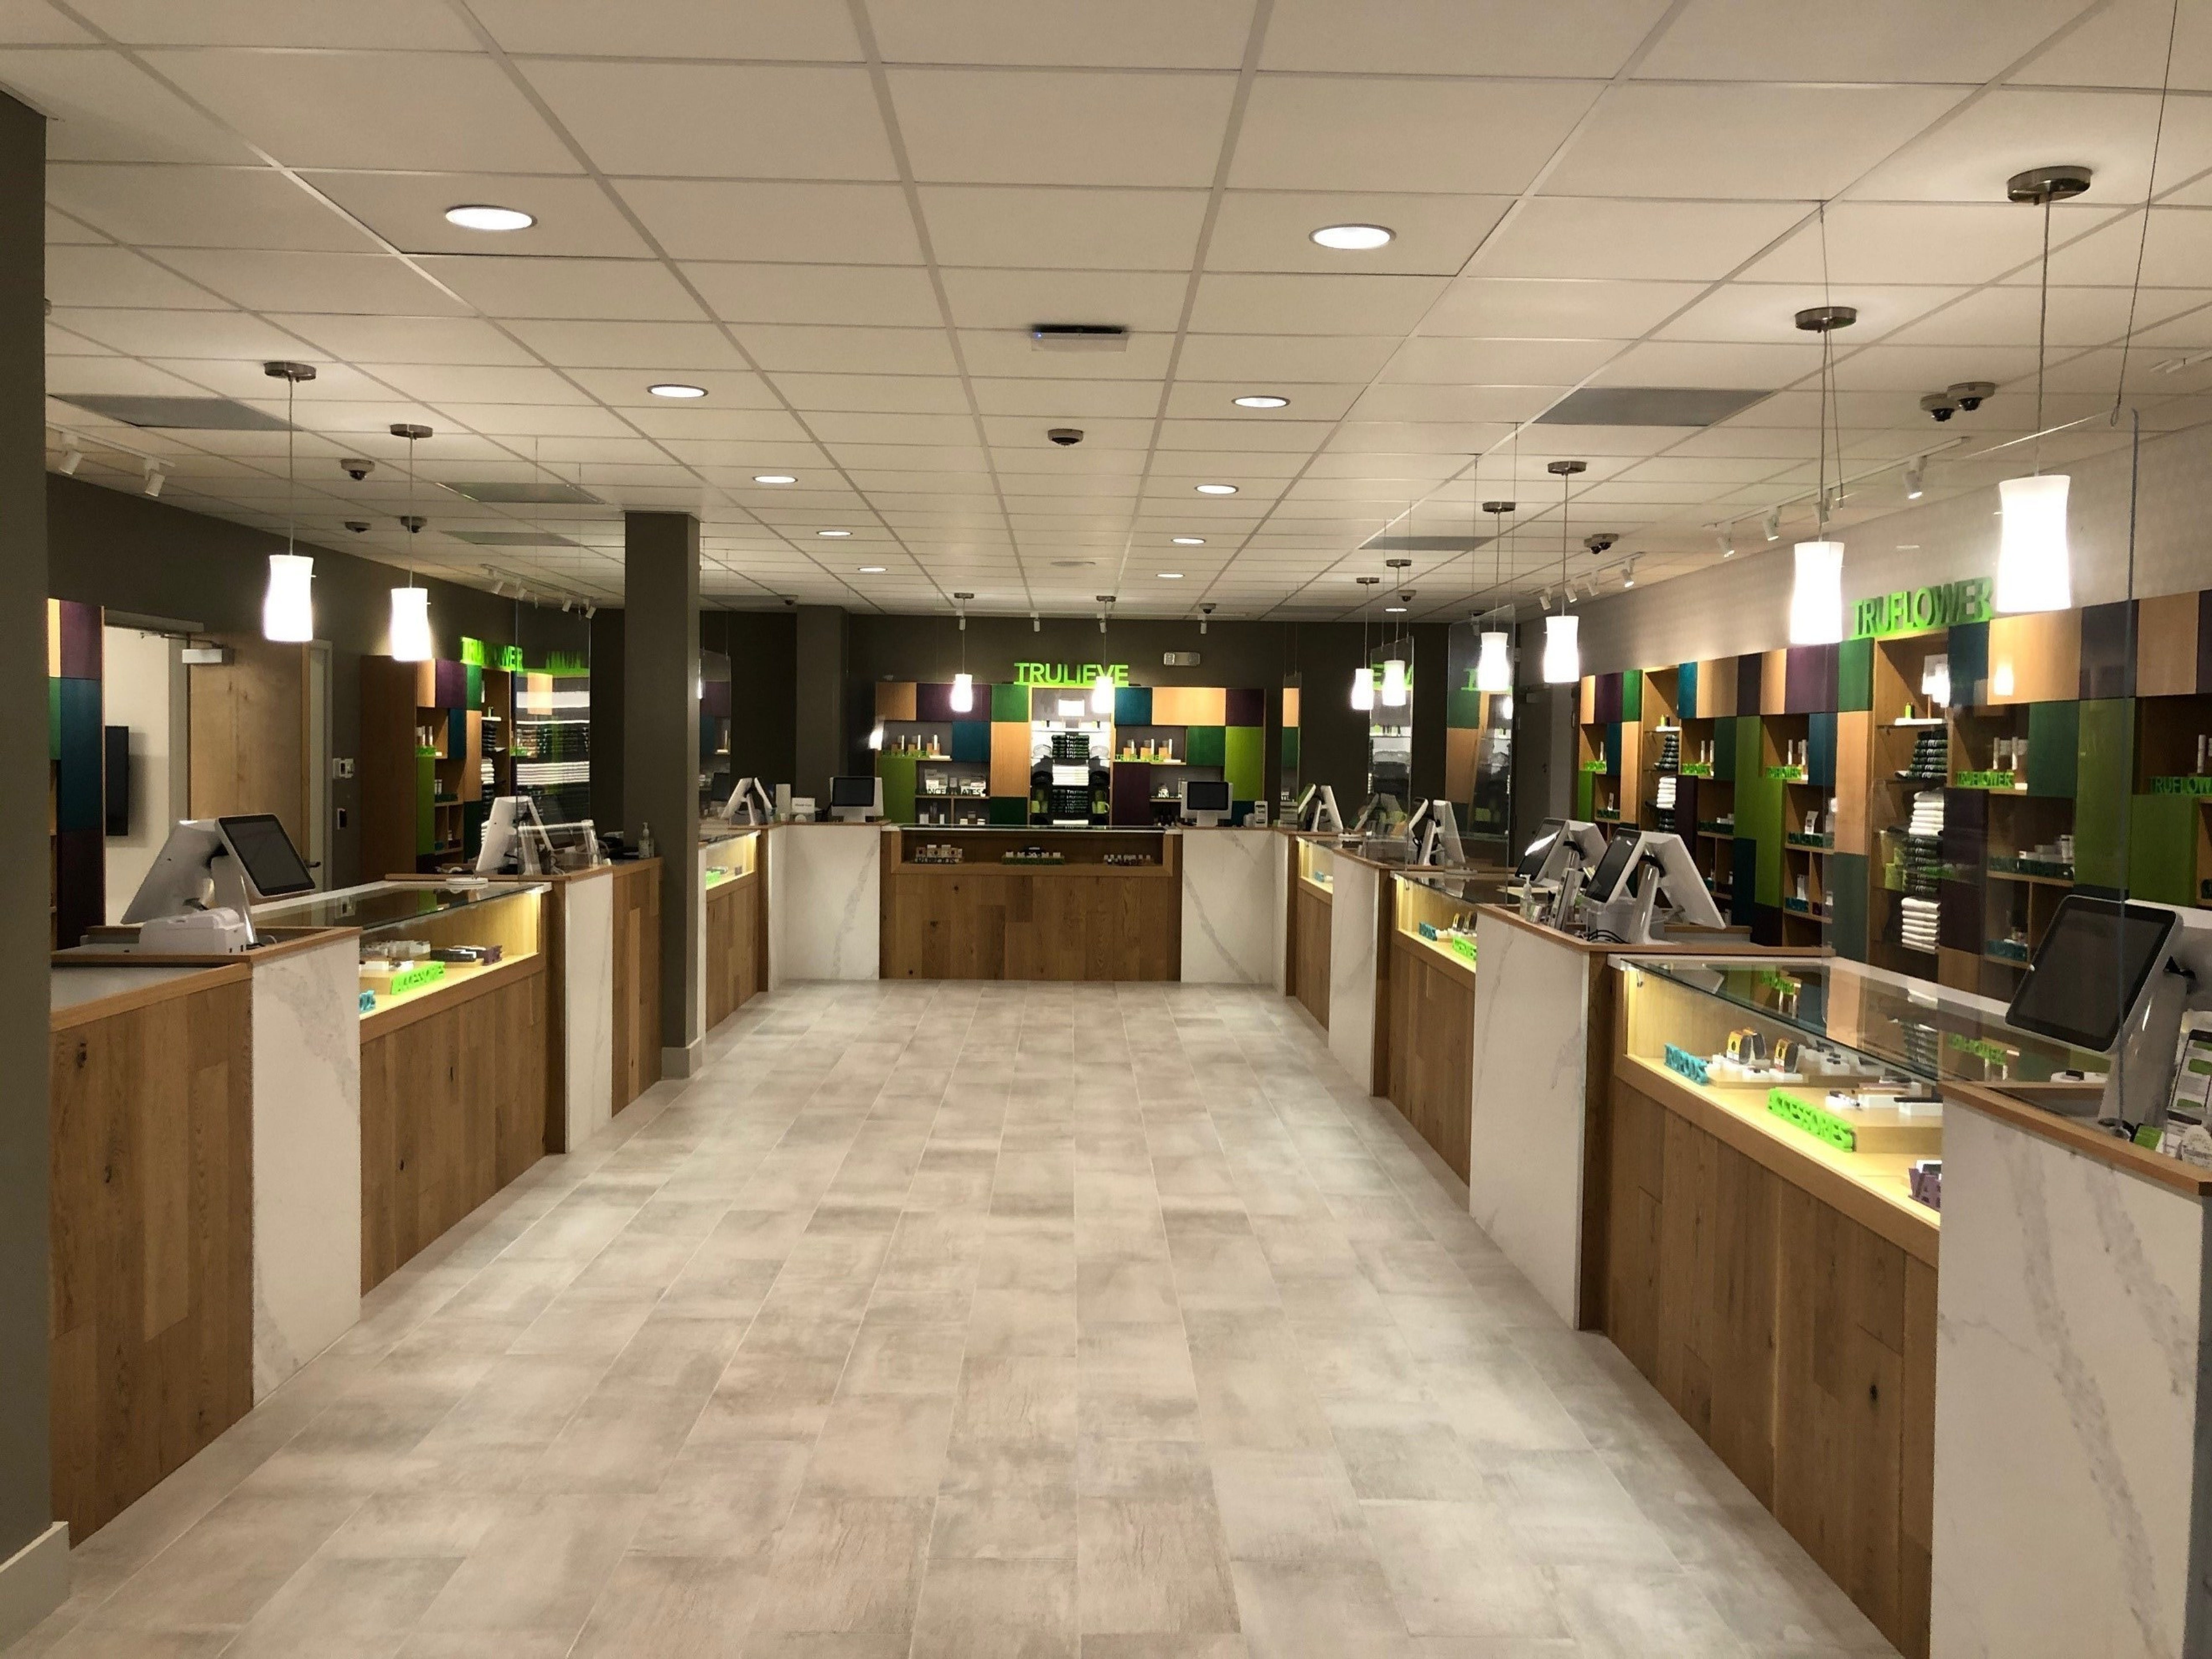 Dispensary Update: Trulieve, Jushi And Cloud Cannabis Each Have New Stores